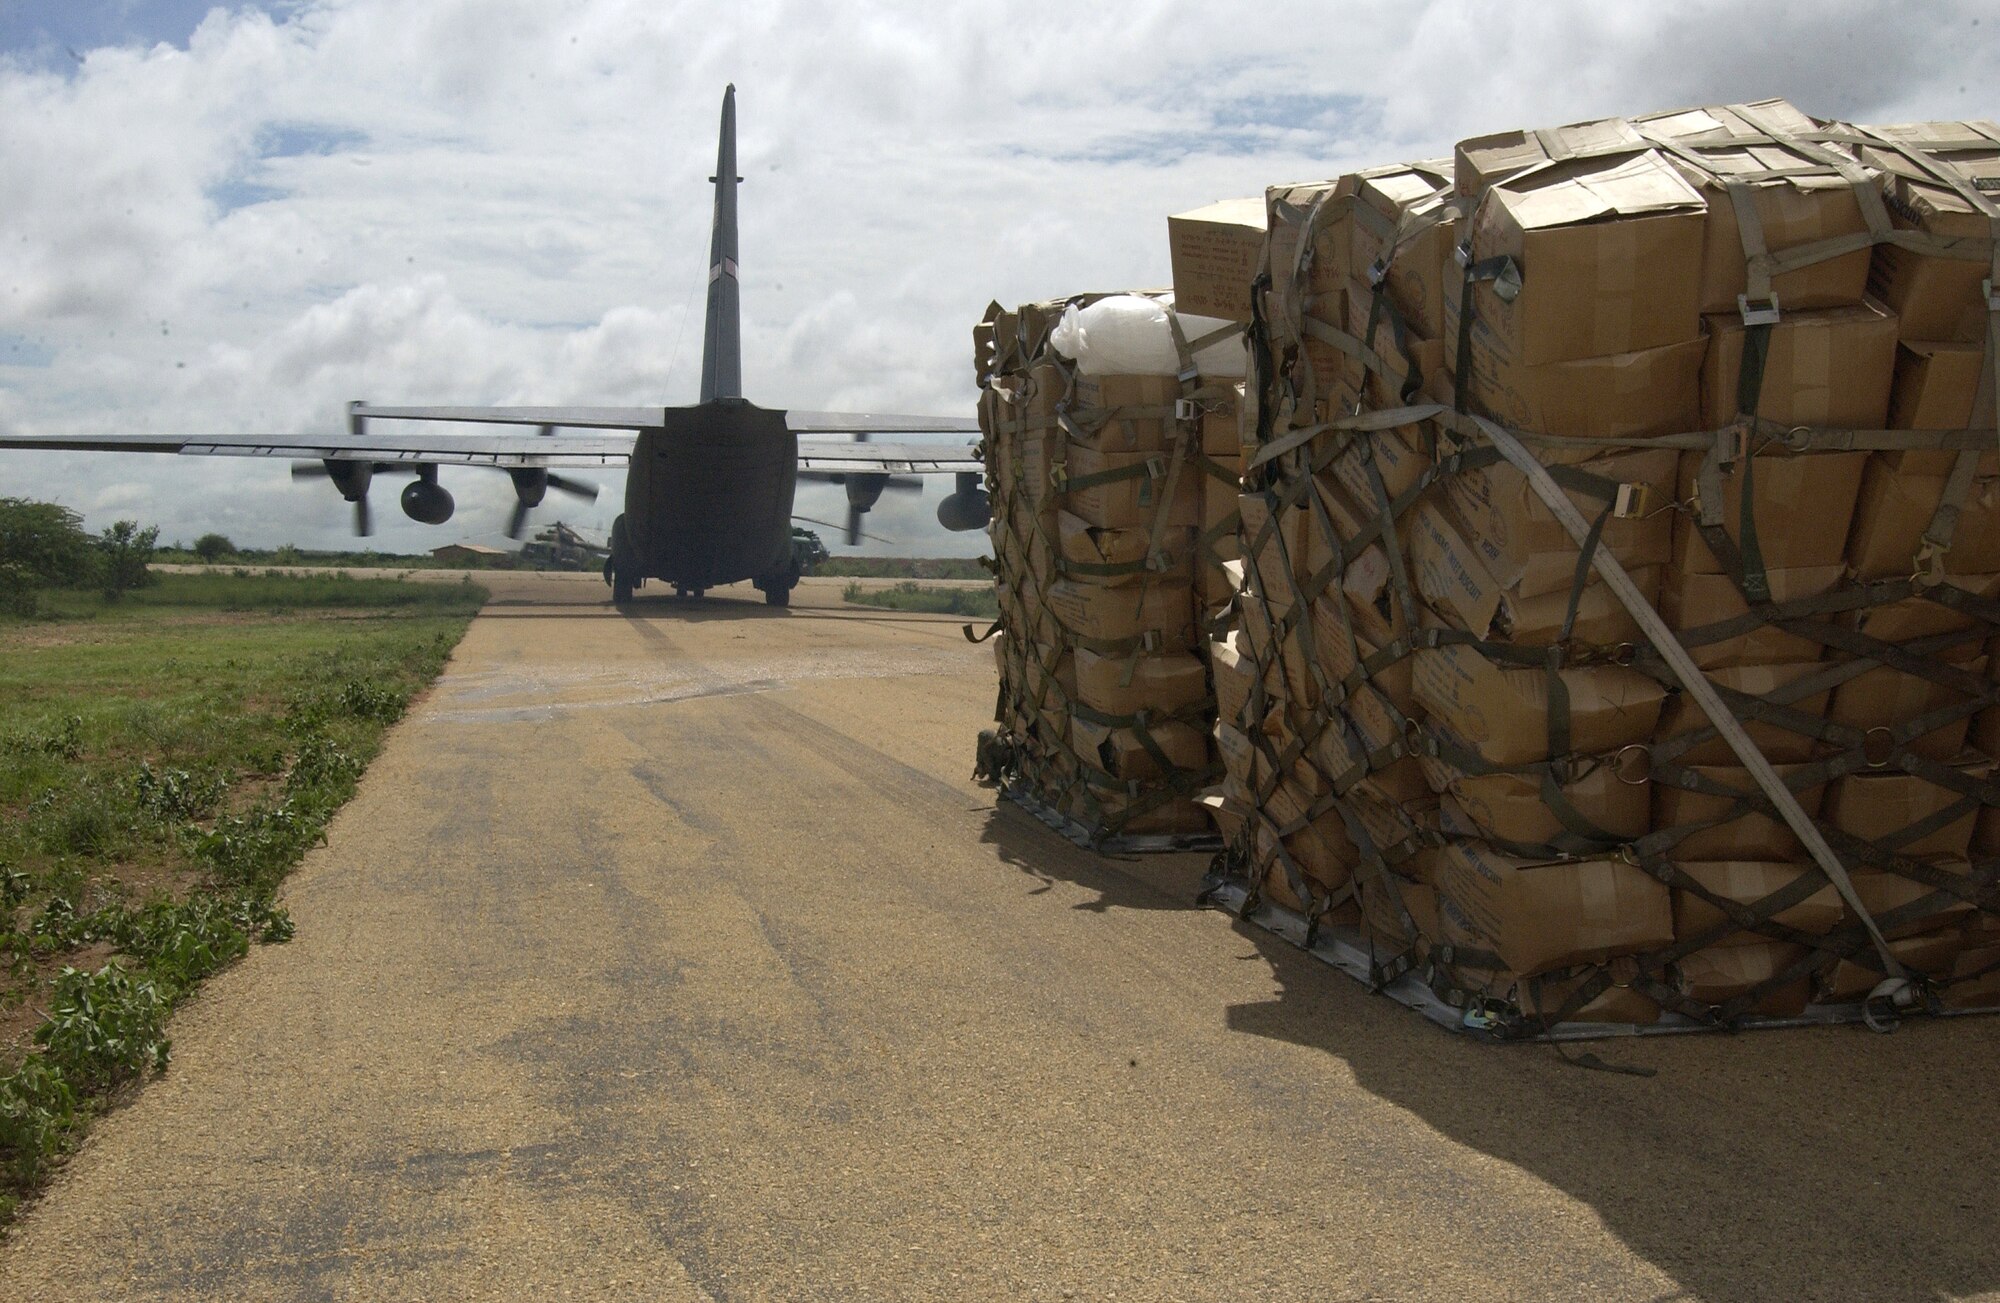 A C-130H Hercules aircraft assigned to Combined Joint Task Force - Horn of Africa delivered humanitarian aid to flood victims in the Ogaden region of Ethiopia Nov. 10. (U.S. Navy photo/Master Chief Petty Officer Philip A. Fortnam) 

